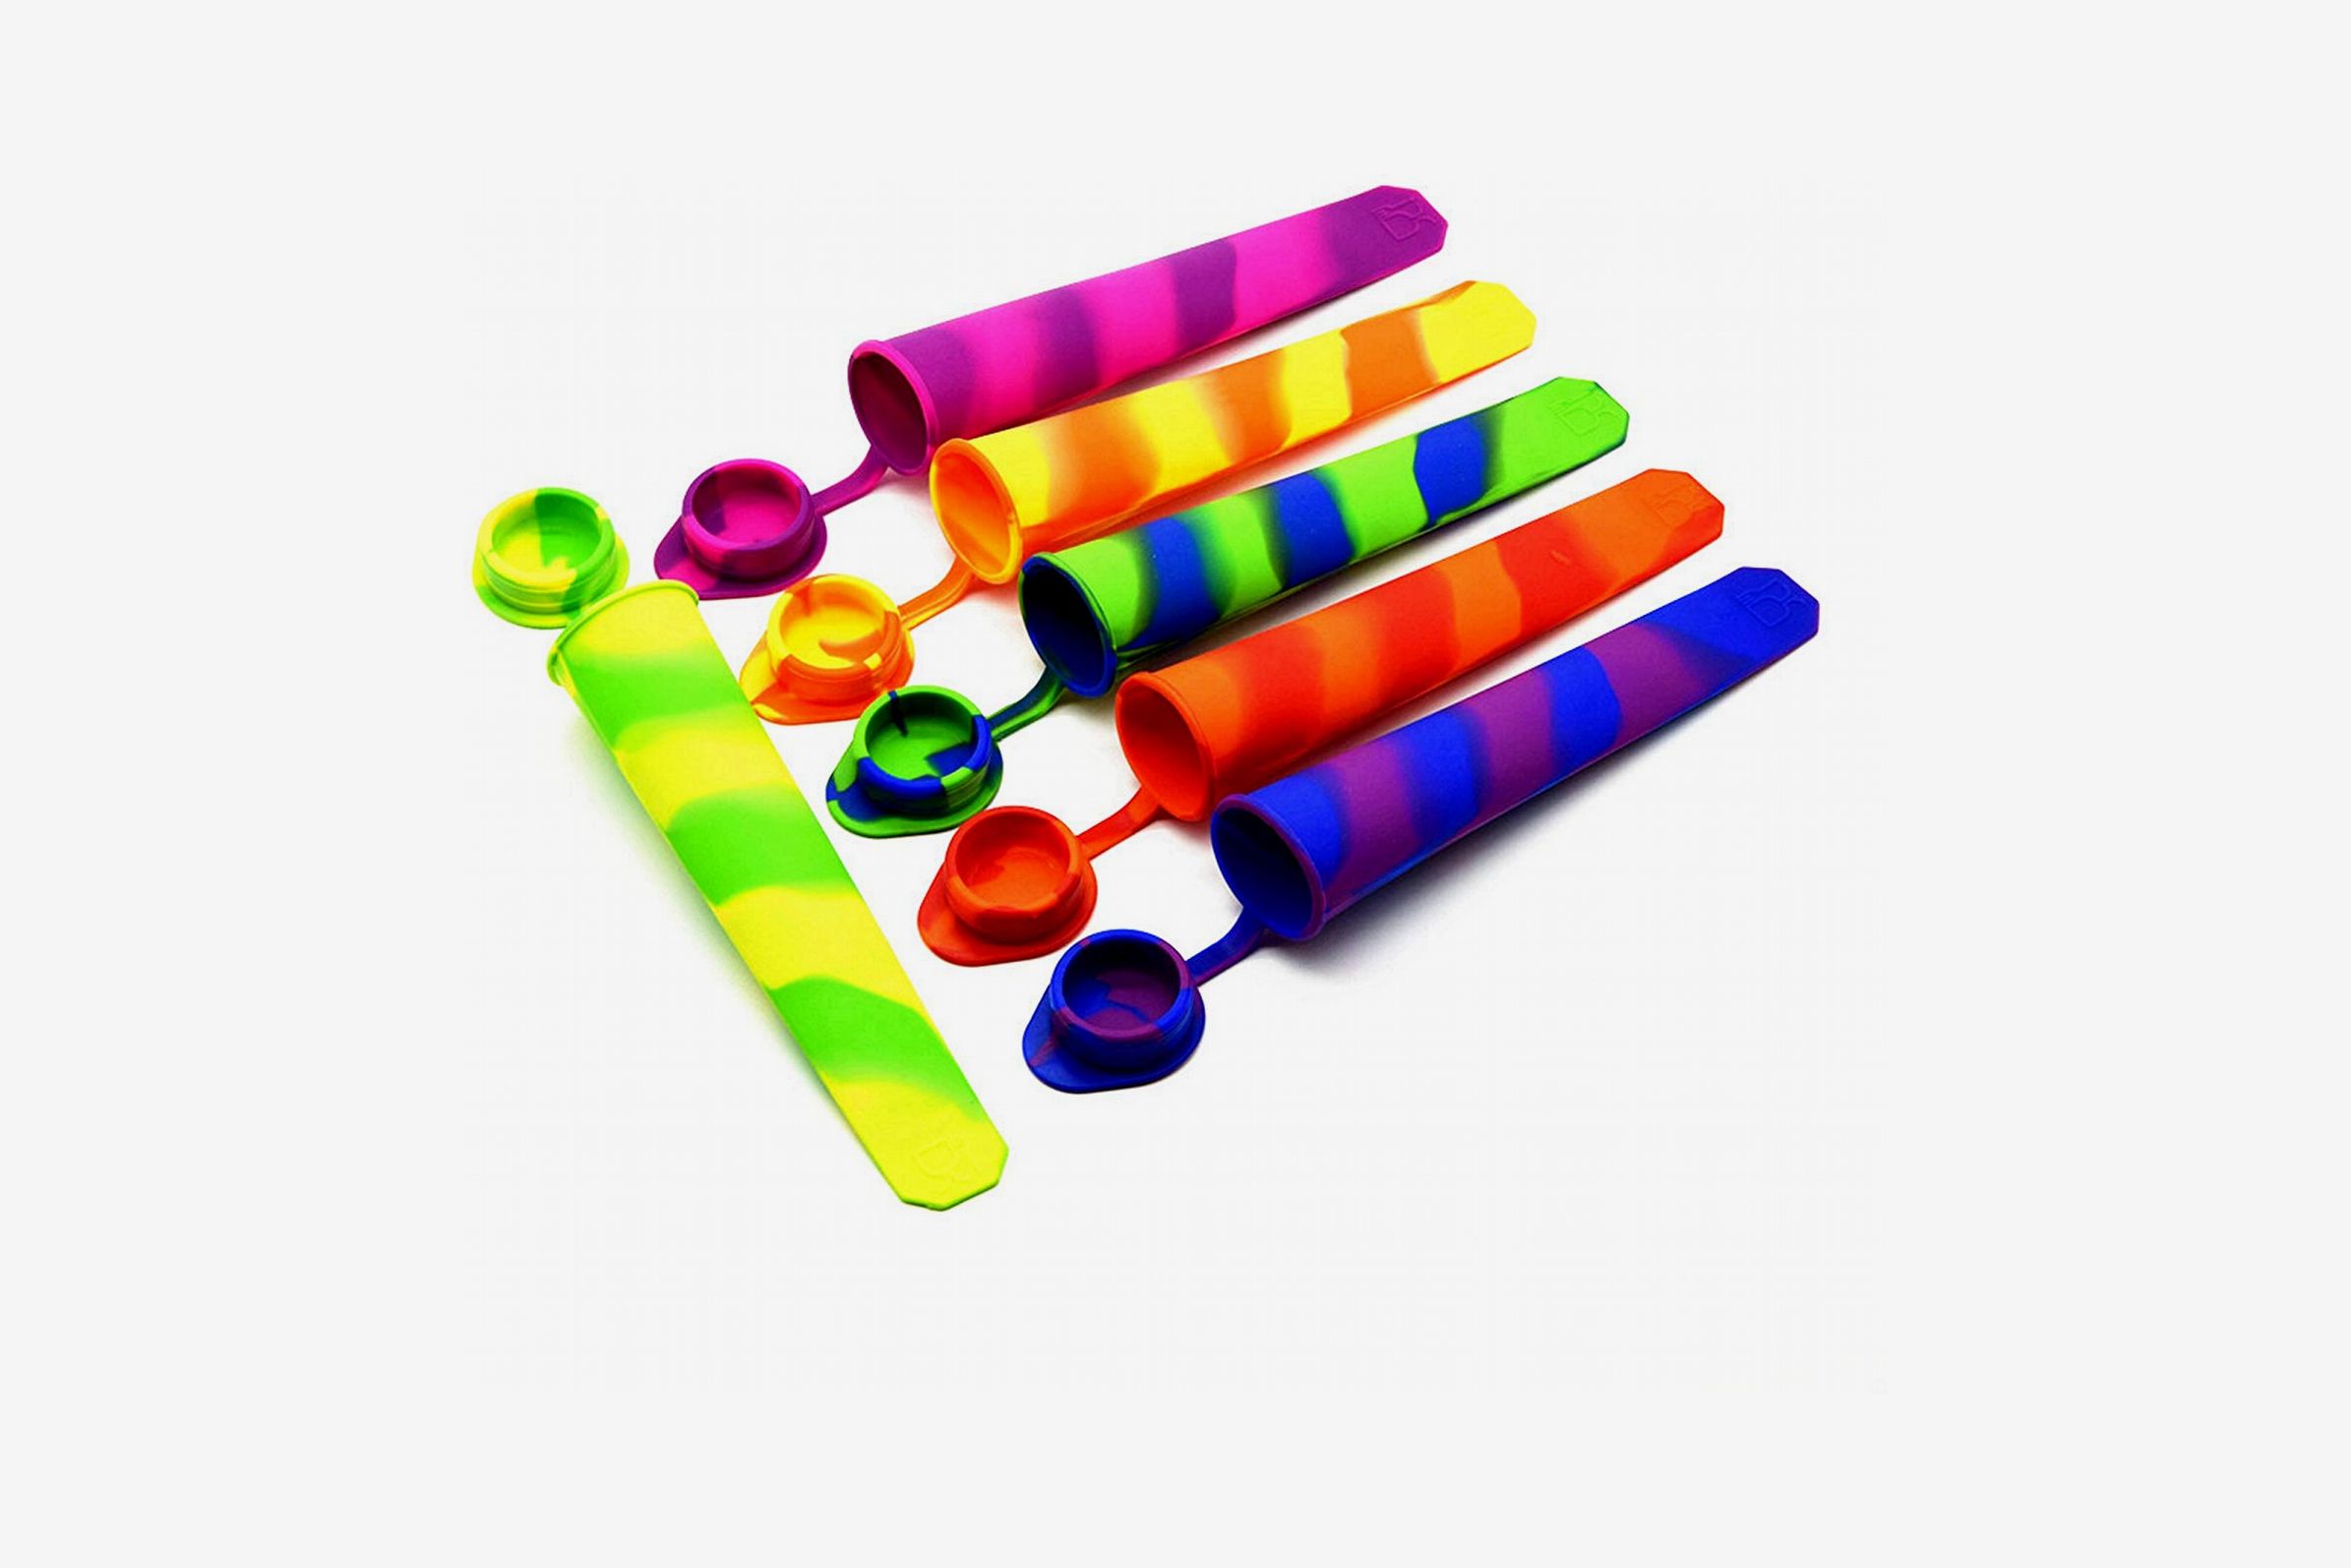 https://pyxis.nymag.com/v1/imgs/470/6db/f943a125dc7ae3ed202fdf303508fbbe36-helpcook-silicone-popsicle-molds.jpg